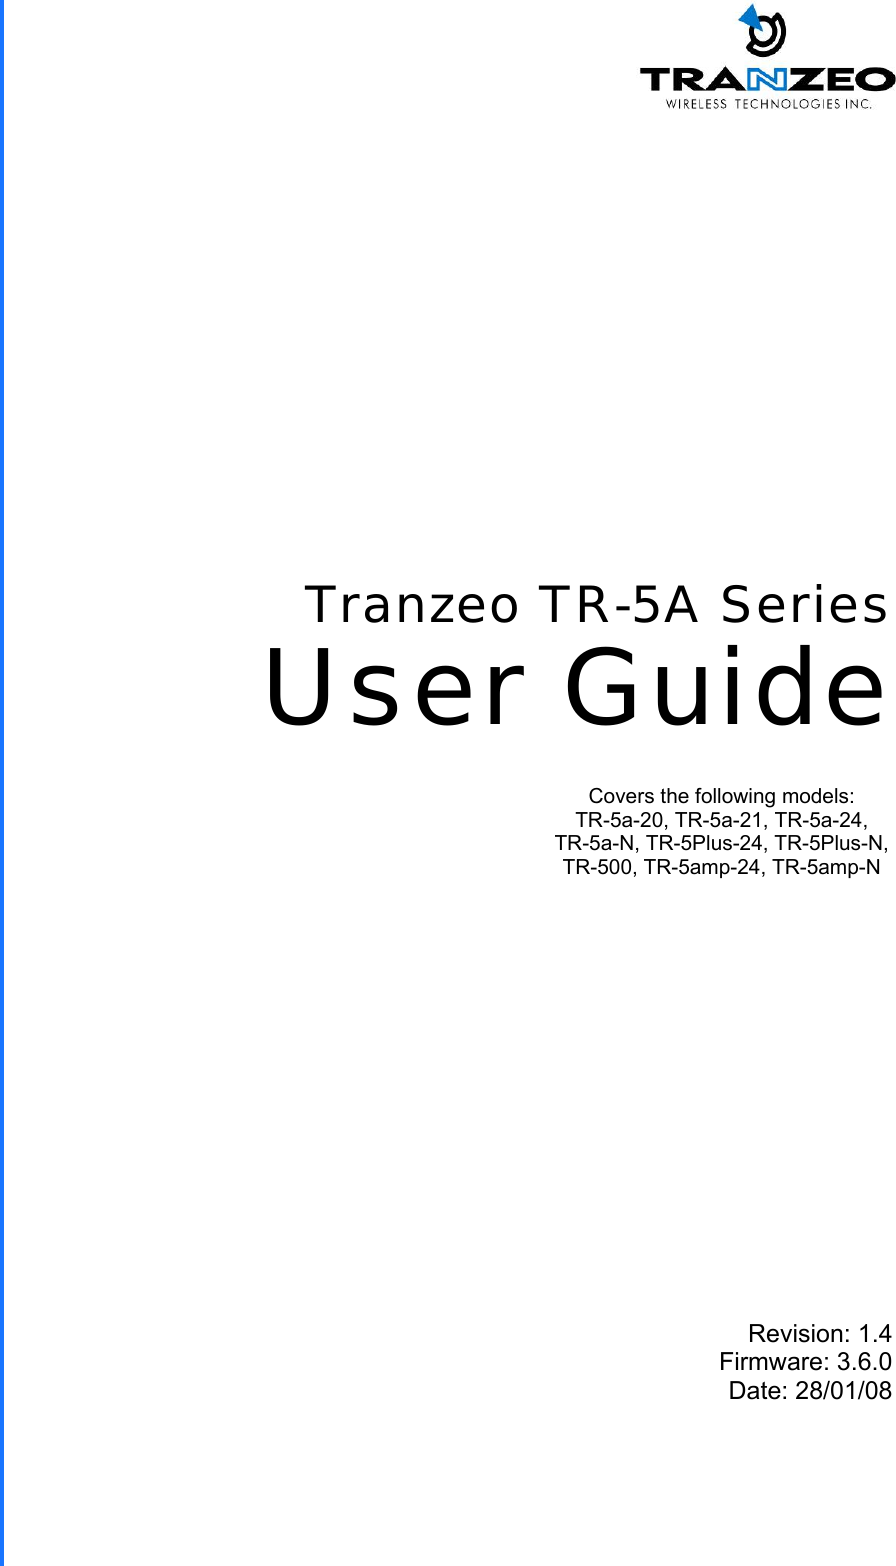  TRANZEO TR-5A Revision: 1.4 Firmware: 3.6.0 Date: 28/01/08 Tranzeo TR-5A Series User Guide Covers the following models:   TR-5a-20, TR-5a-21, TR-5a-24,  TR-5a-N, TR-5Plus-24, TR-5Plus-N, TR-500, TR-5amp-24, TR-5amp-N 